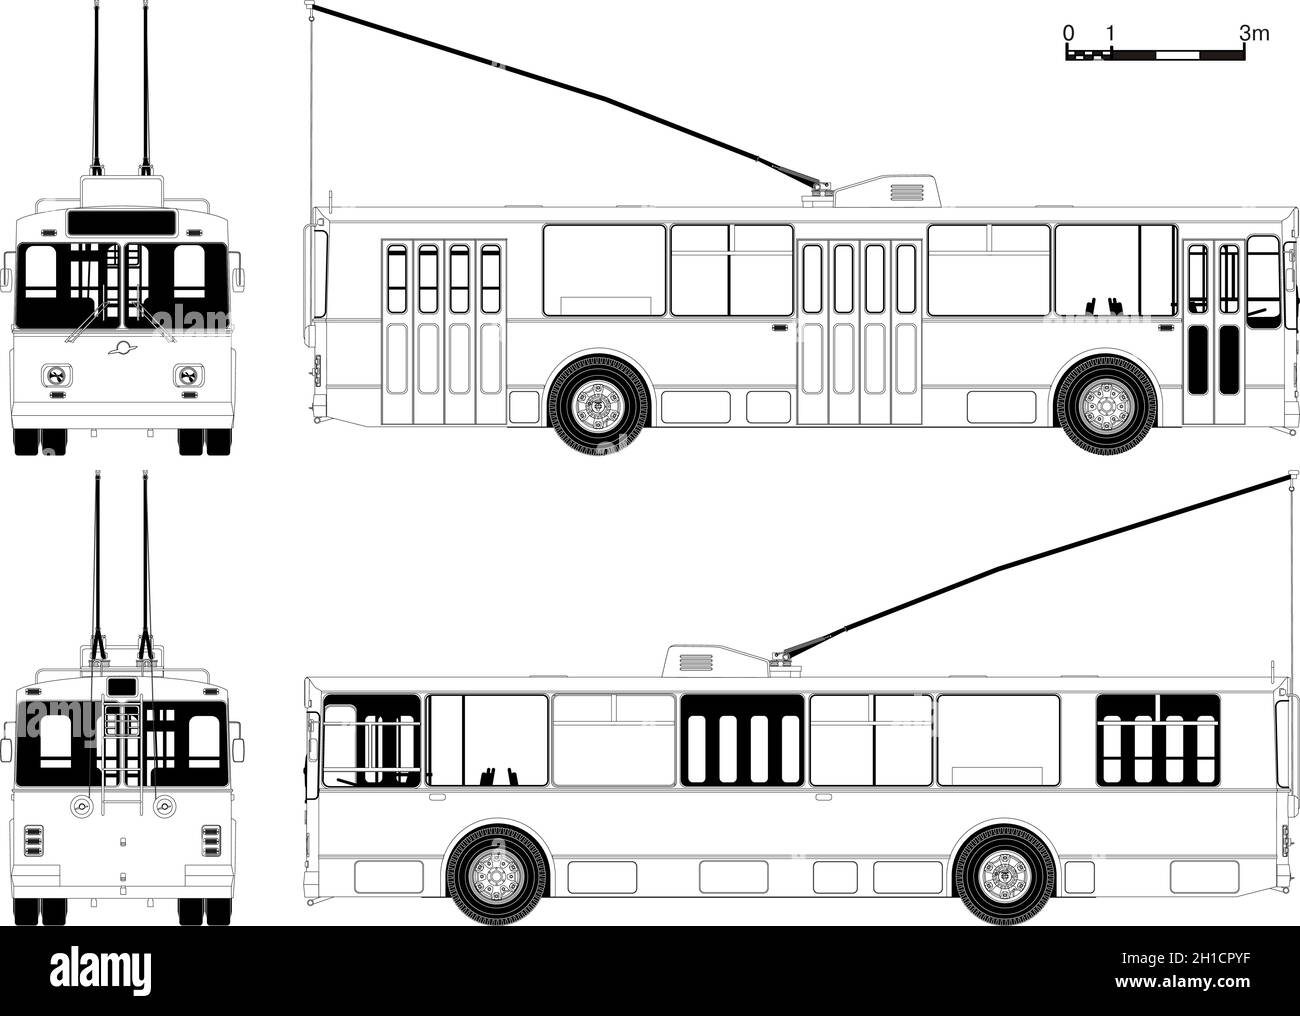 schematic drawing urban trolley. Available EPS-8 vector format separated by groups and layers for easy edit Stock Vector